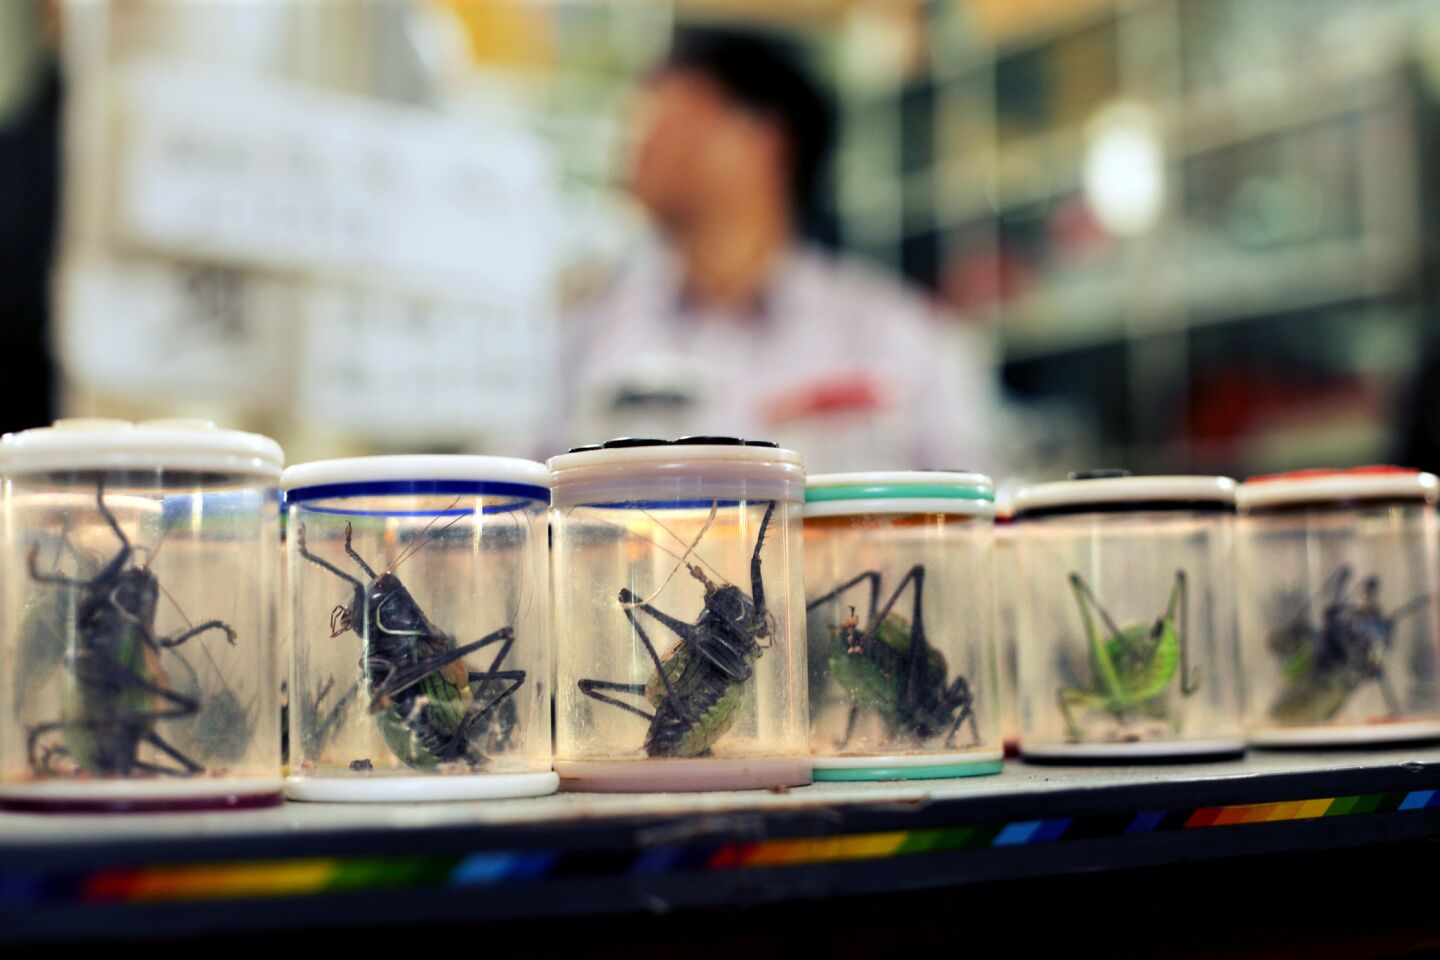 A closer look at some crickets for sale.